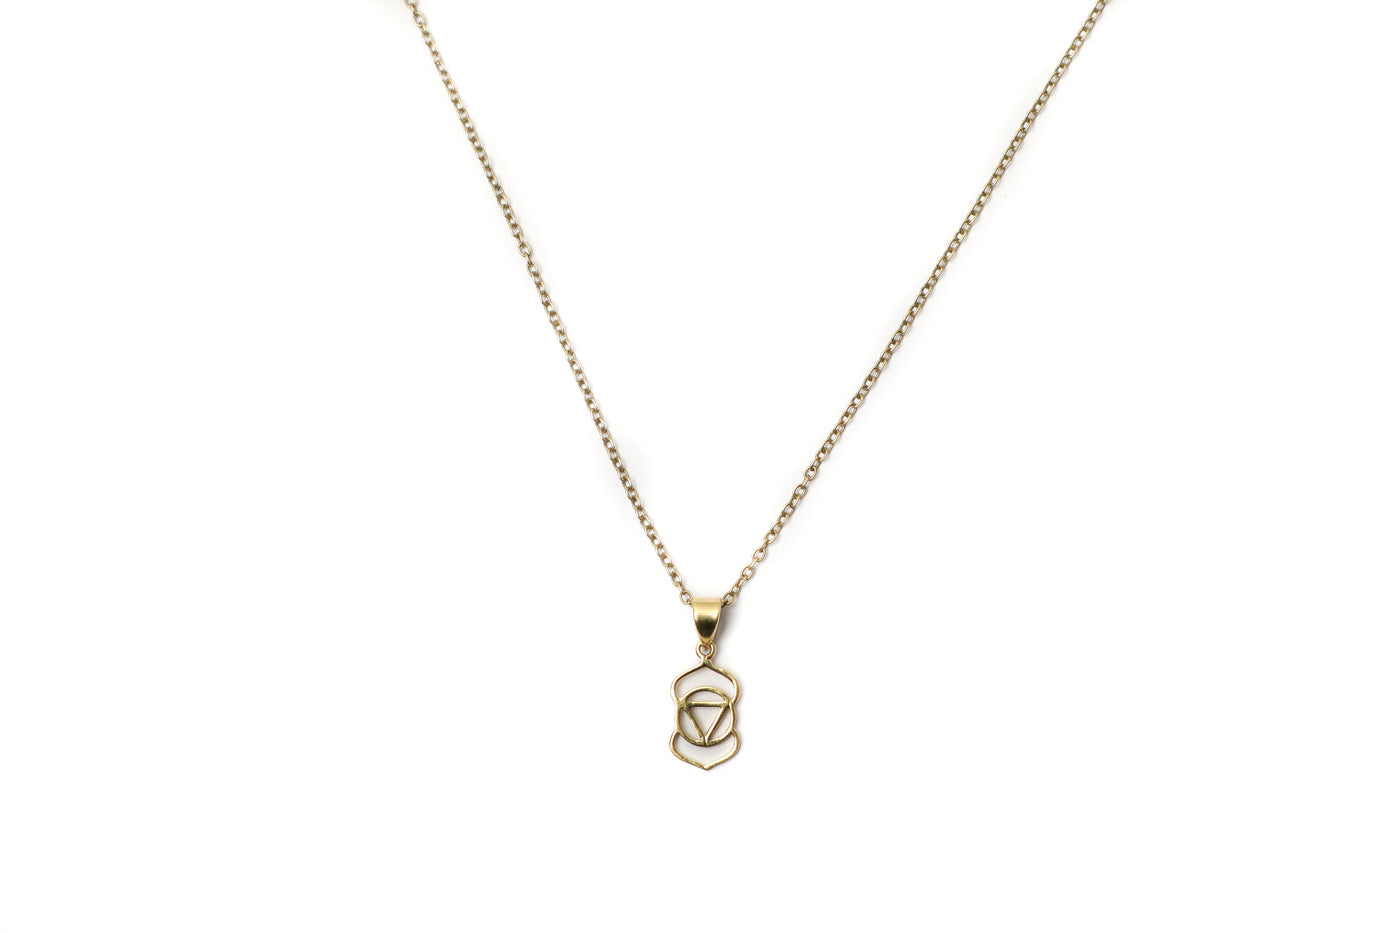 Third Eye Chakra necklace | 18k Gold Plated